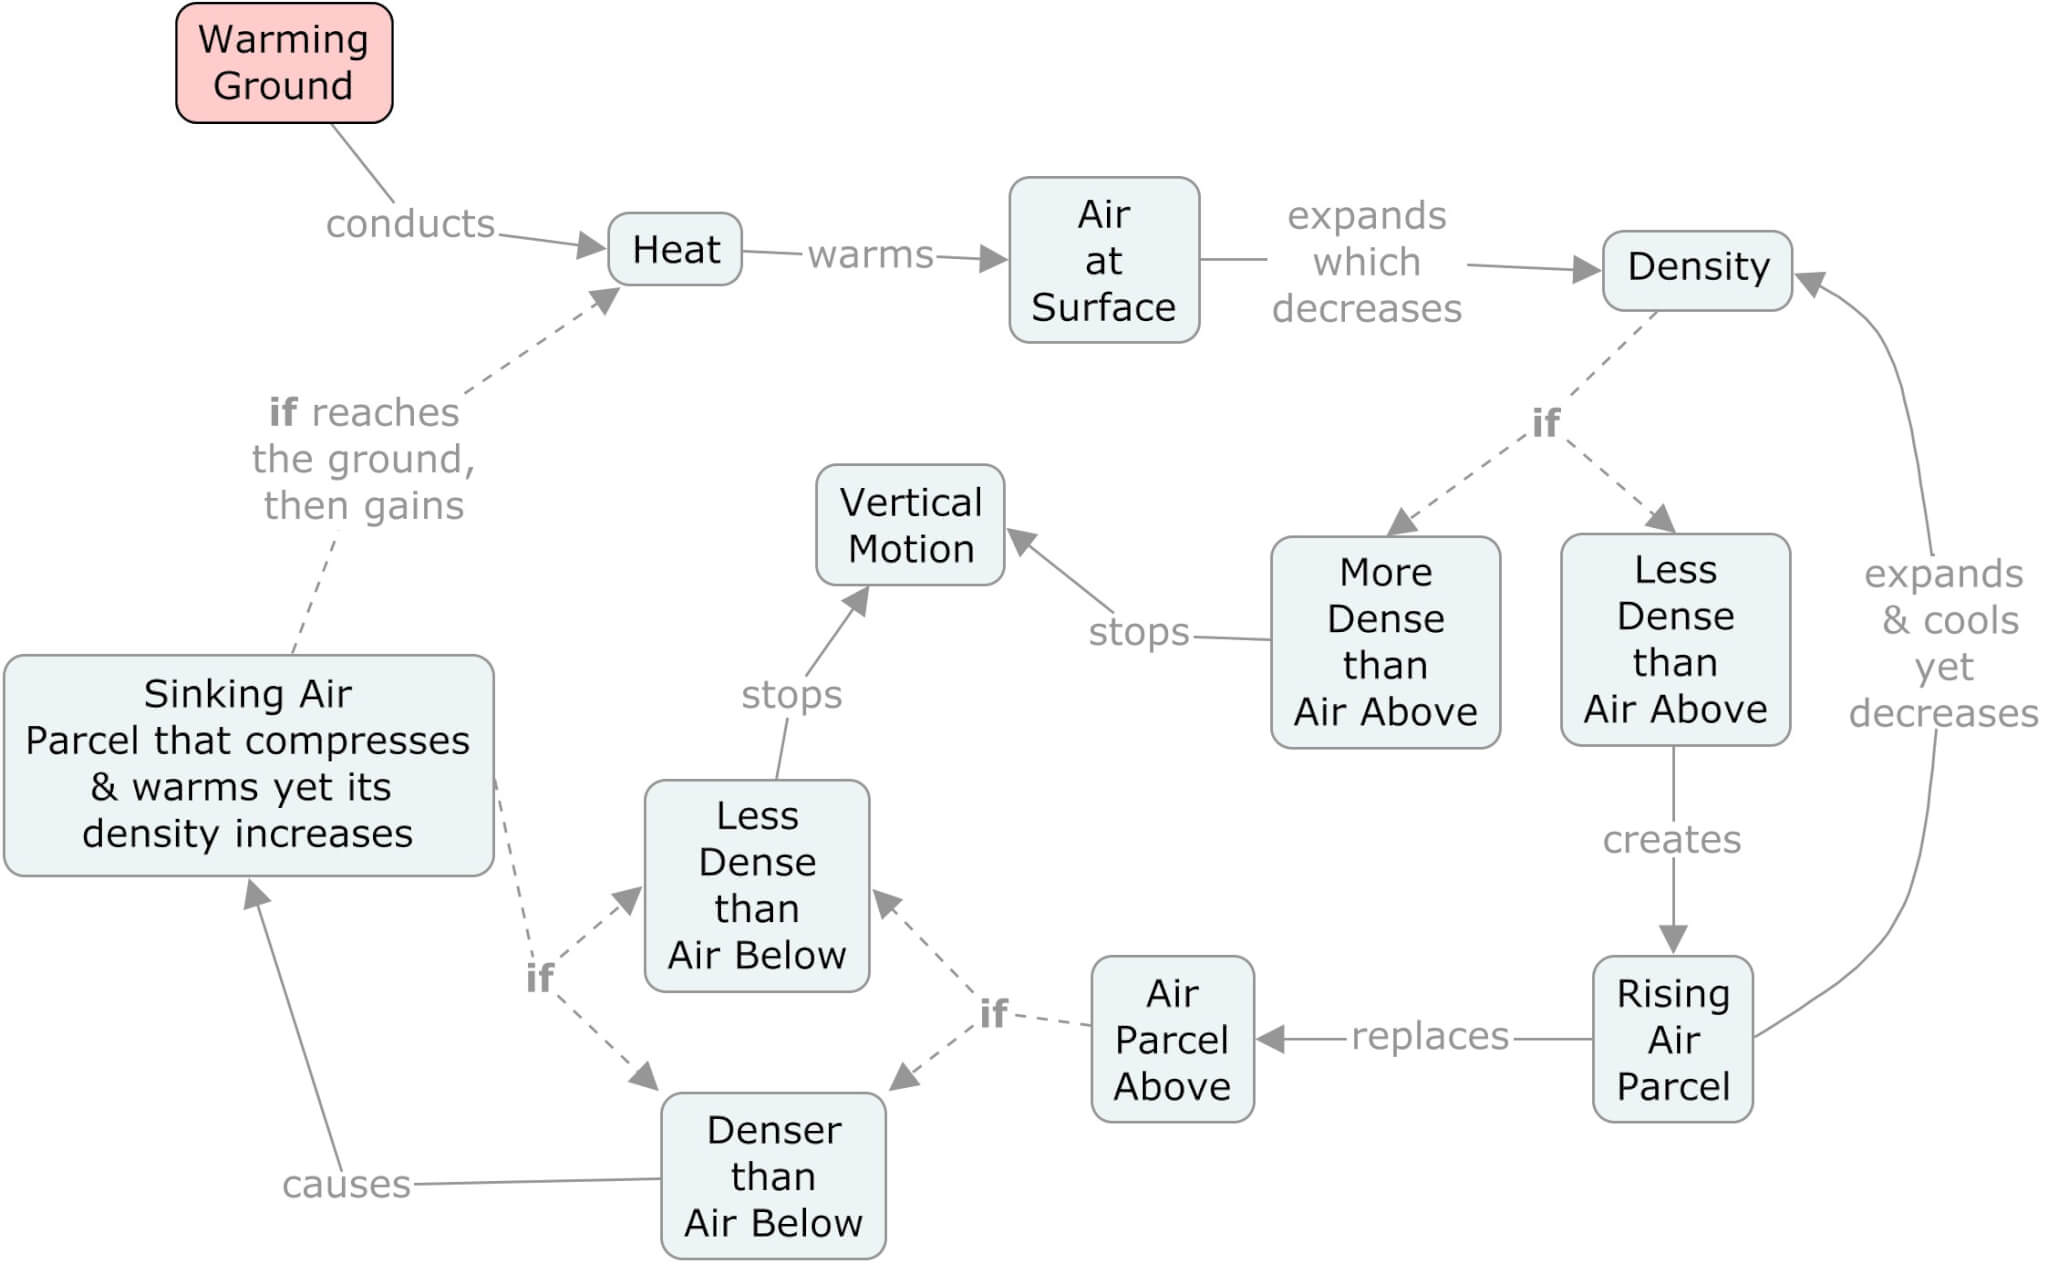 Concept map of atmospheric convection driven by heating the ground.